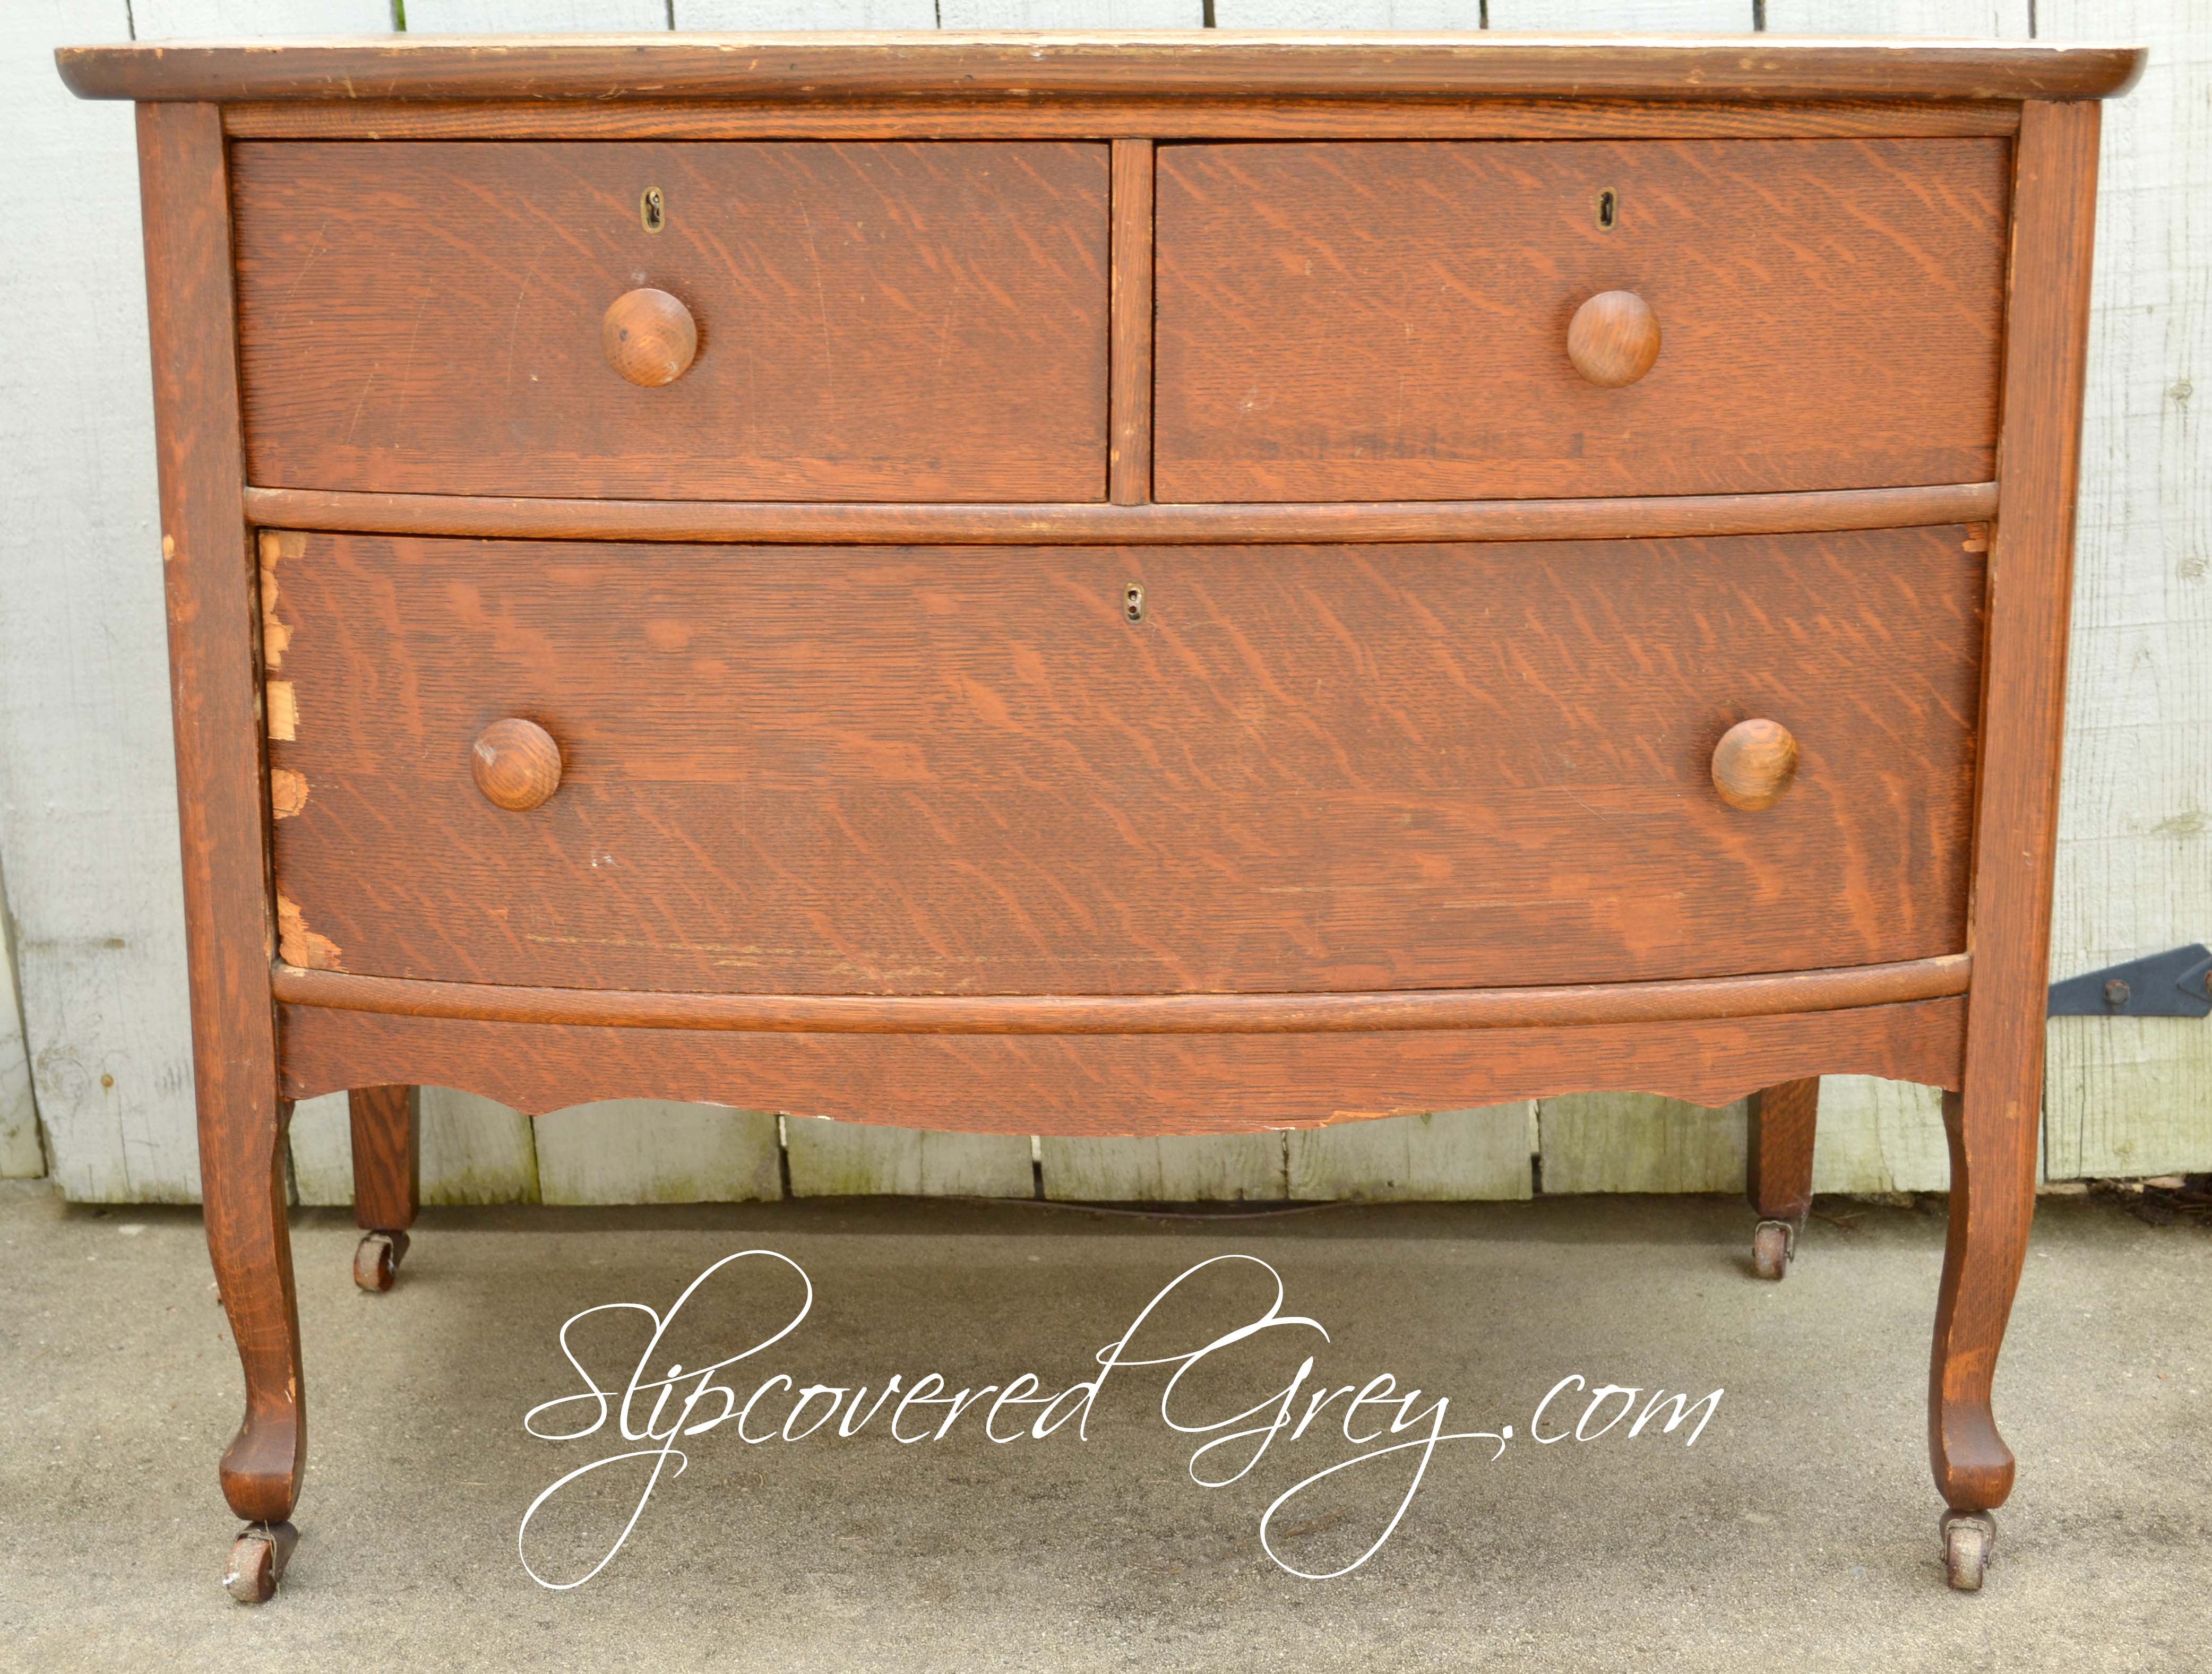 Fix Chipped Veneer The Easy Way - Slipcovered Grey